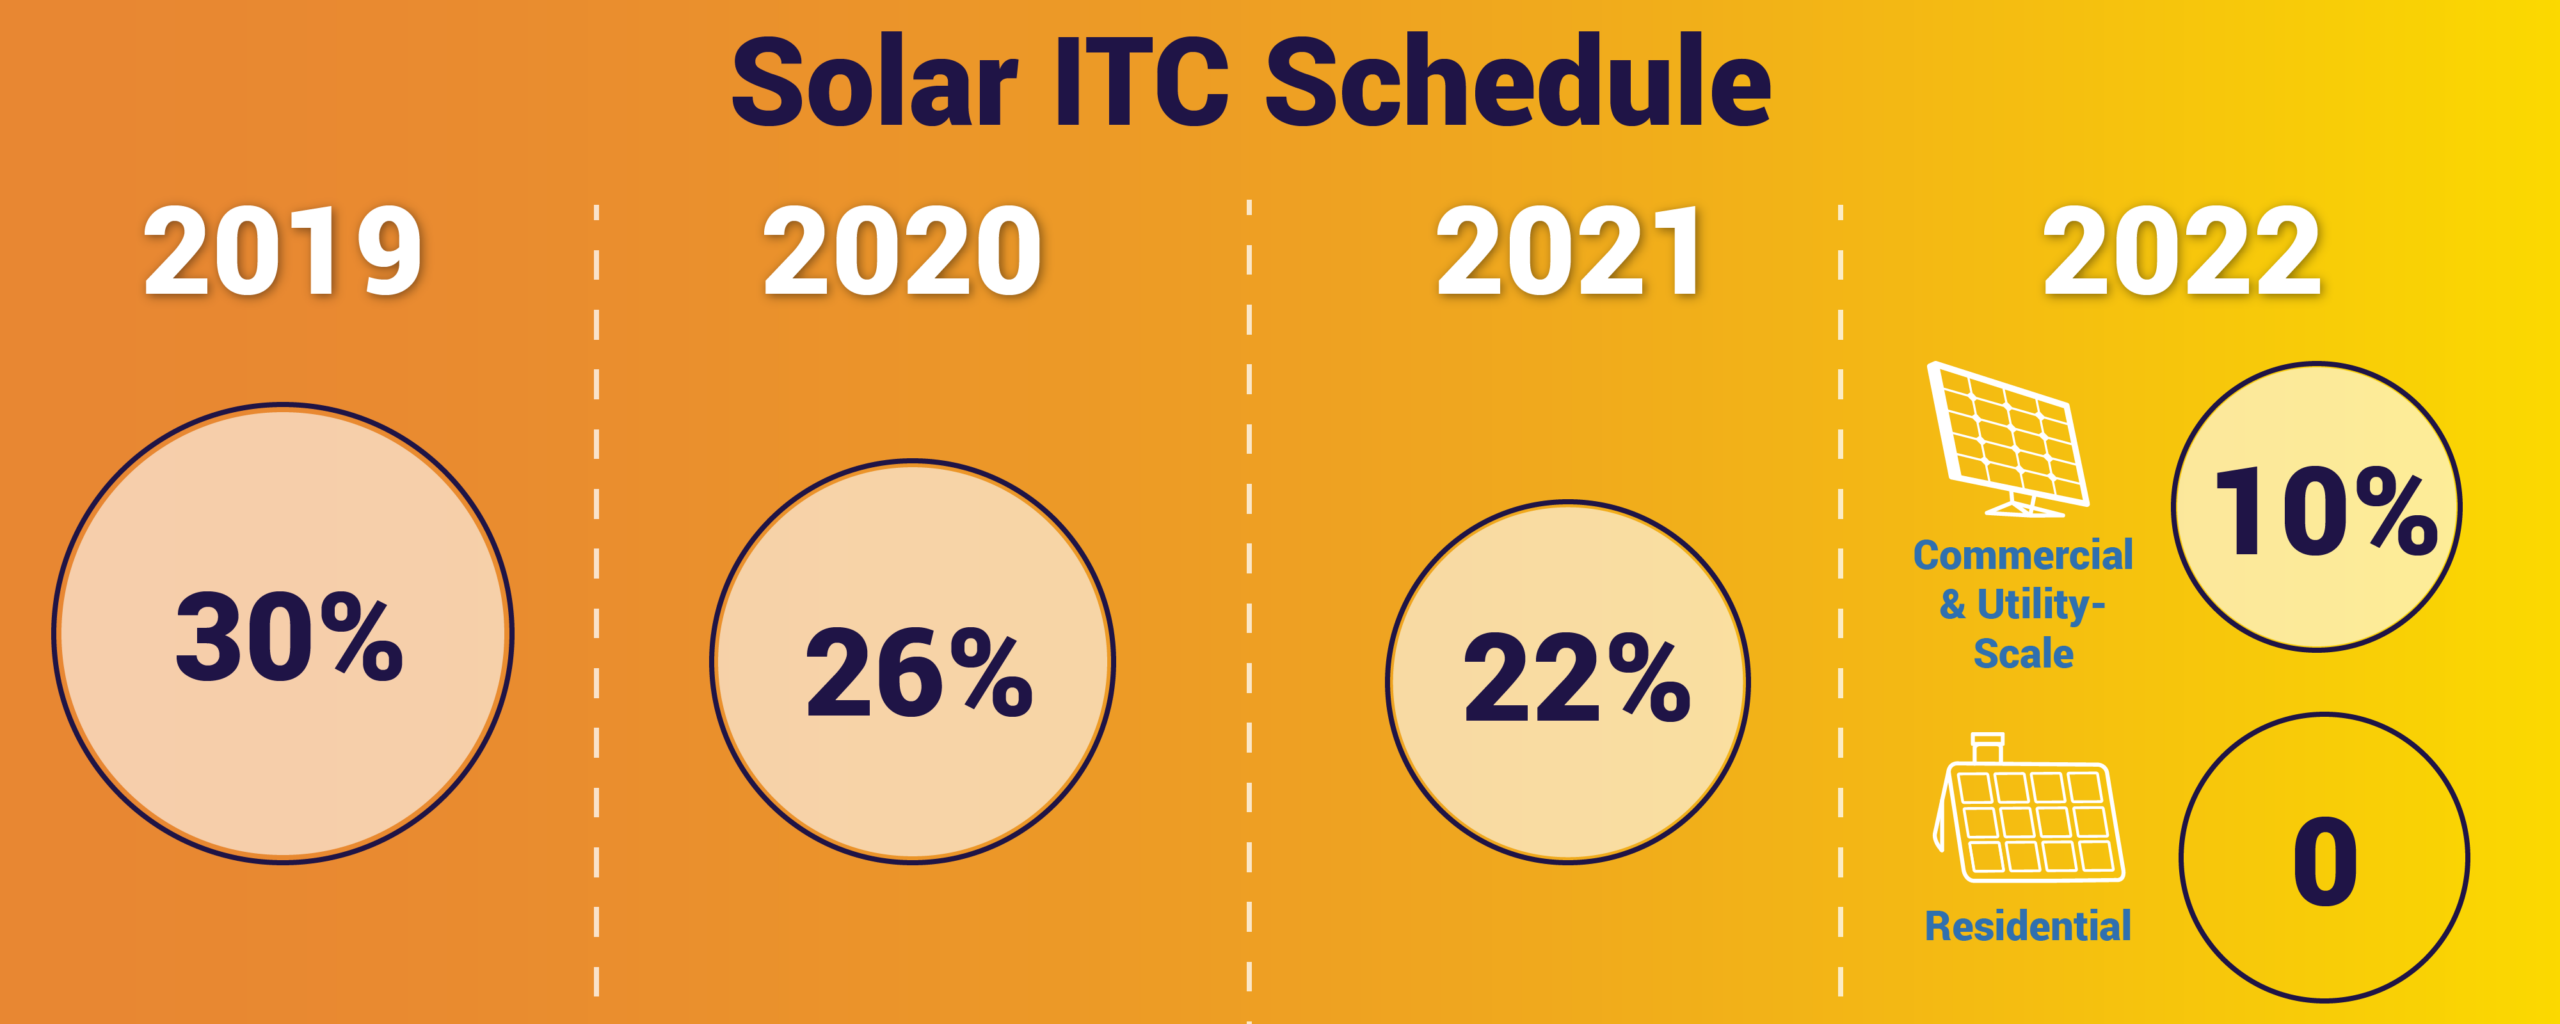 Solar ITC Schedule from 2019-2022 for solar tax credit step down